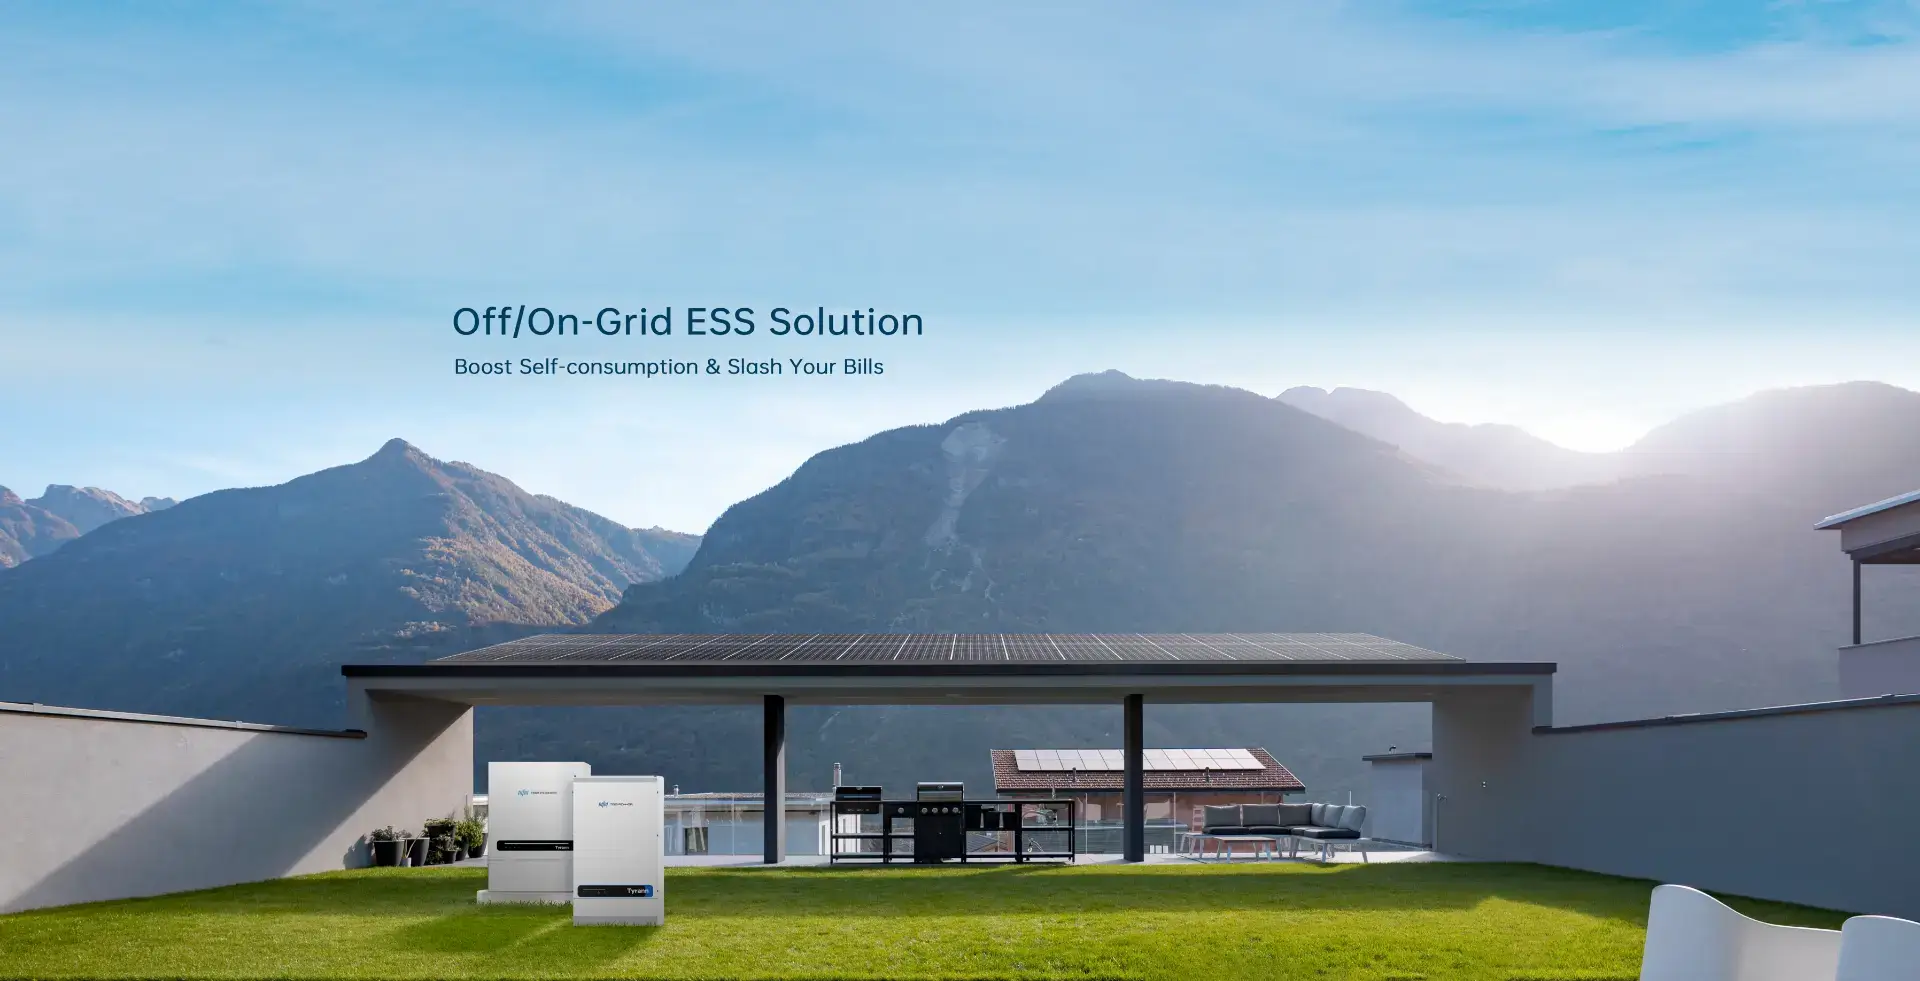 off-grid and ESS solution